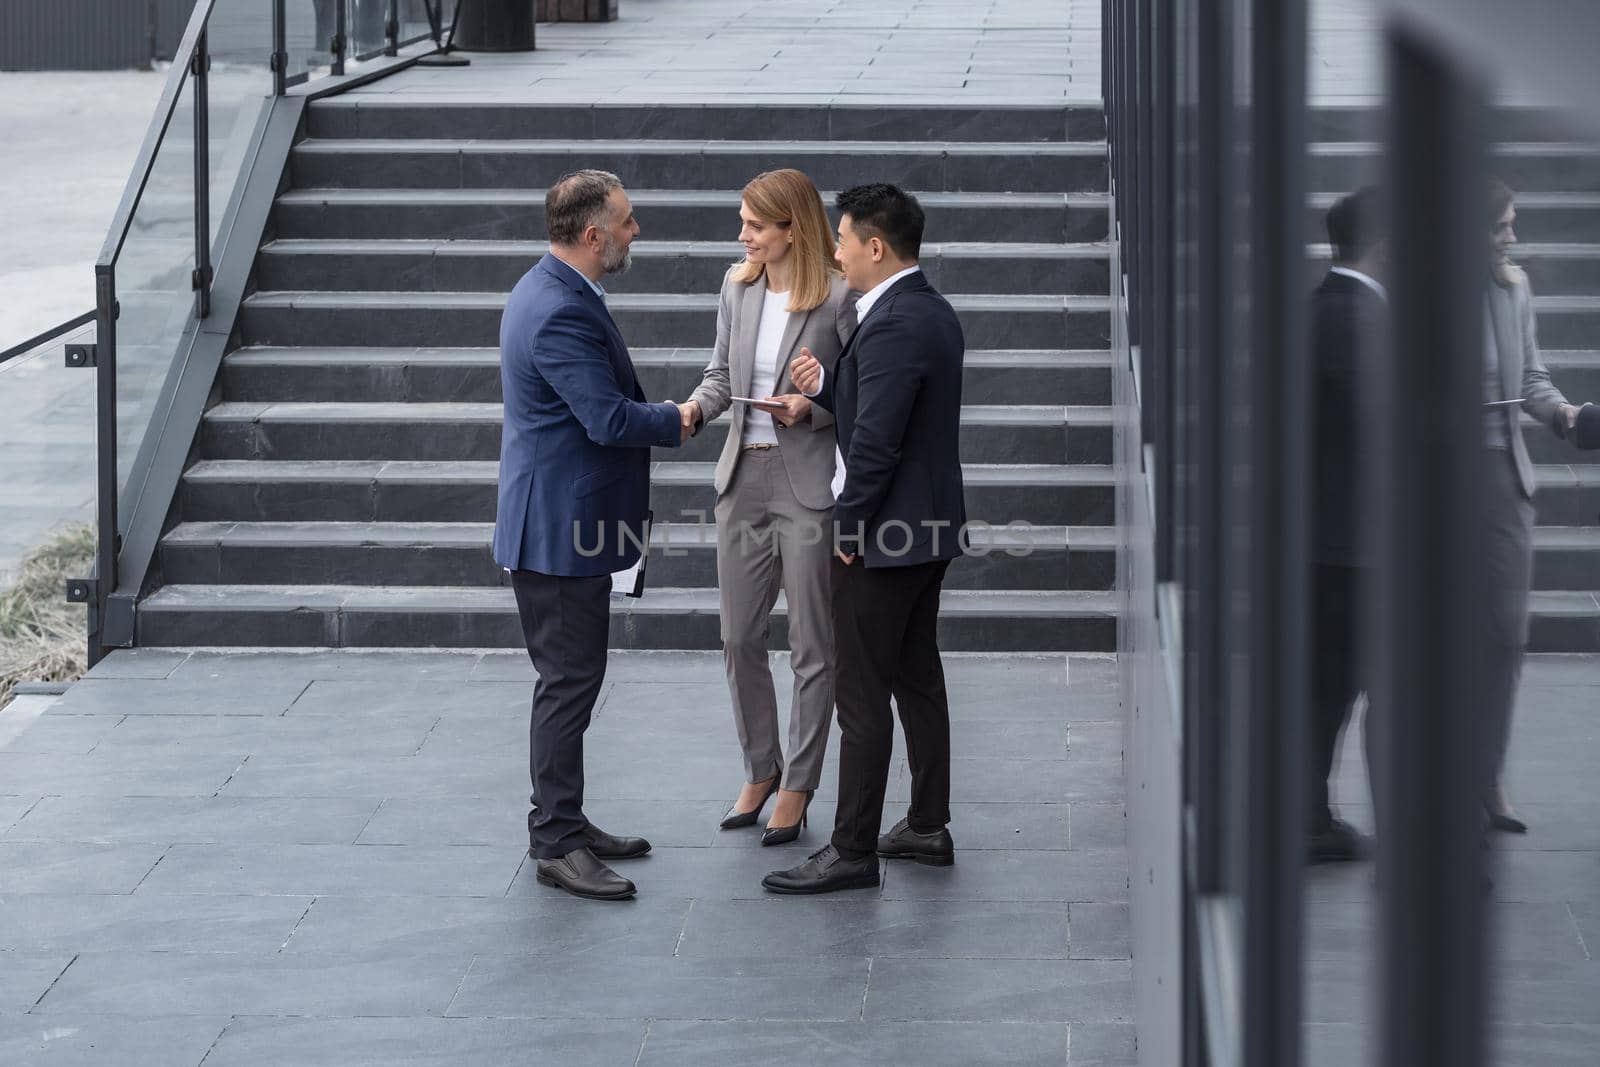 Meeting of three successful business people, diverse dream team man and woman outside office building, greeting and shaking hands, experienced professionals specialists in business suits talking